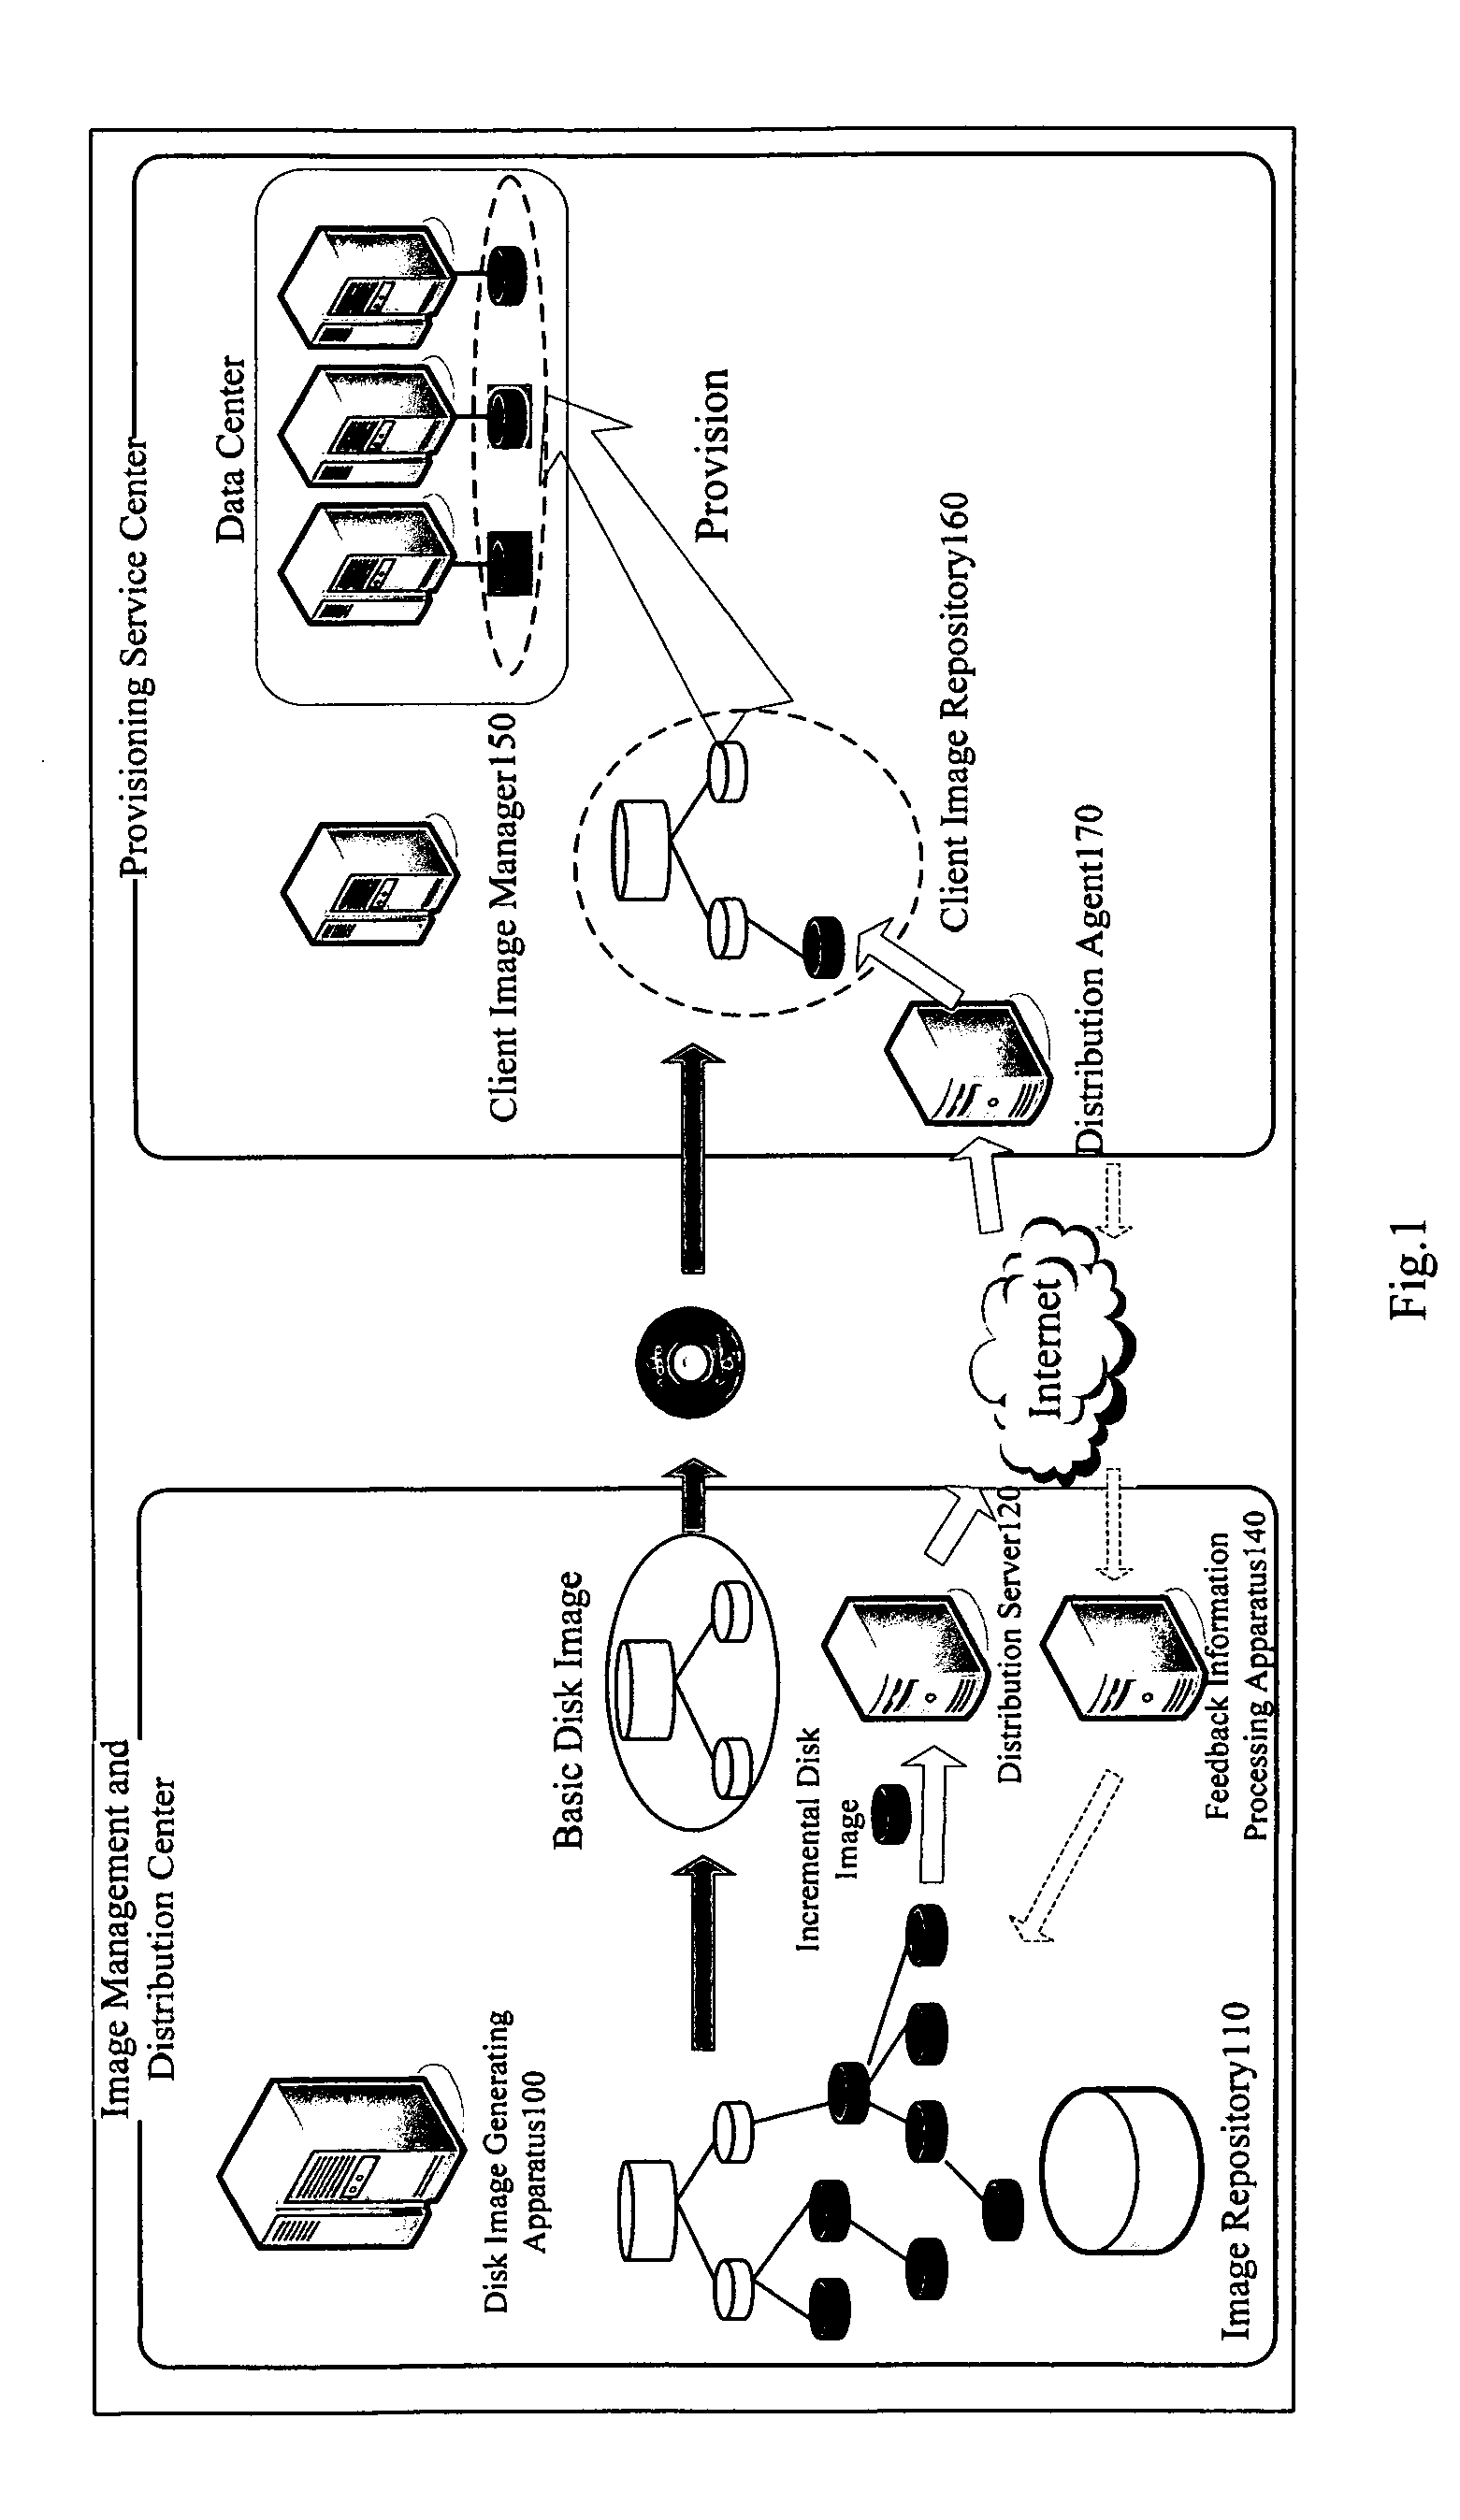 Application server provisioning system and method based on disk image profile